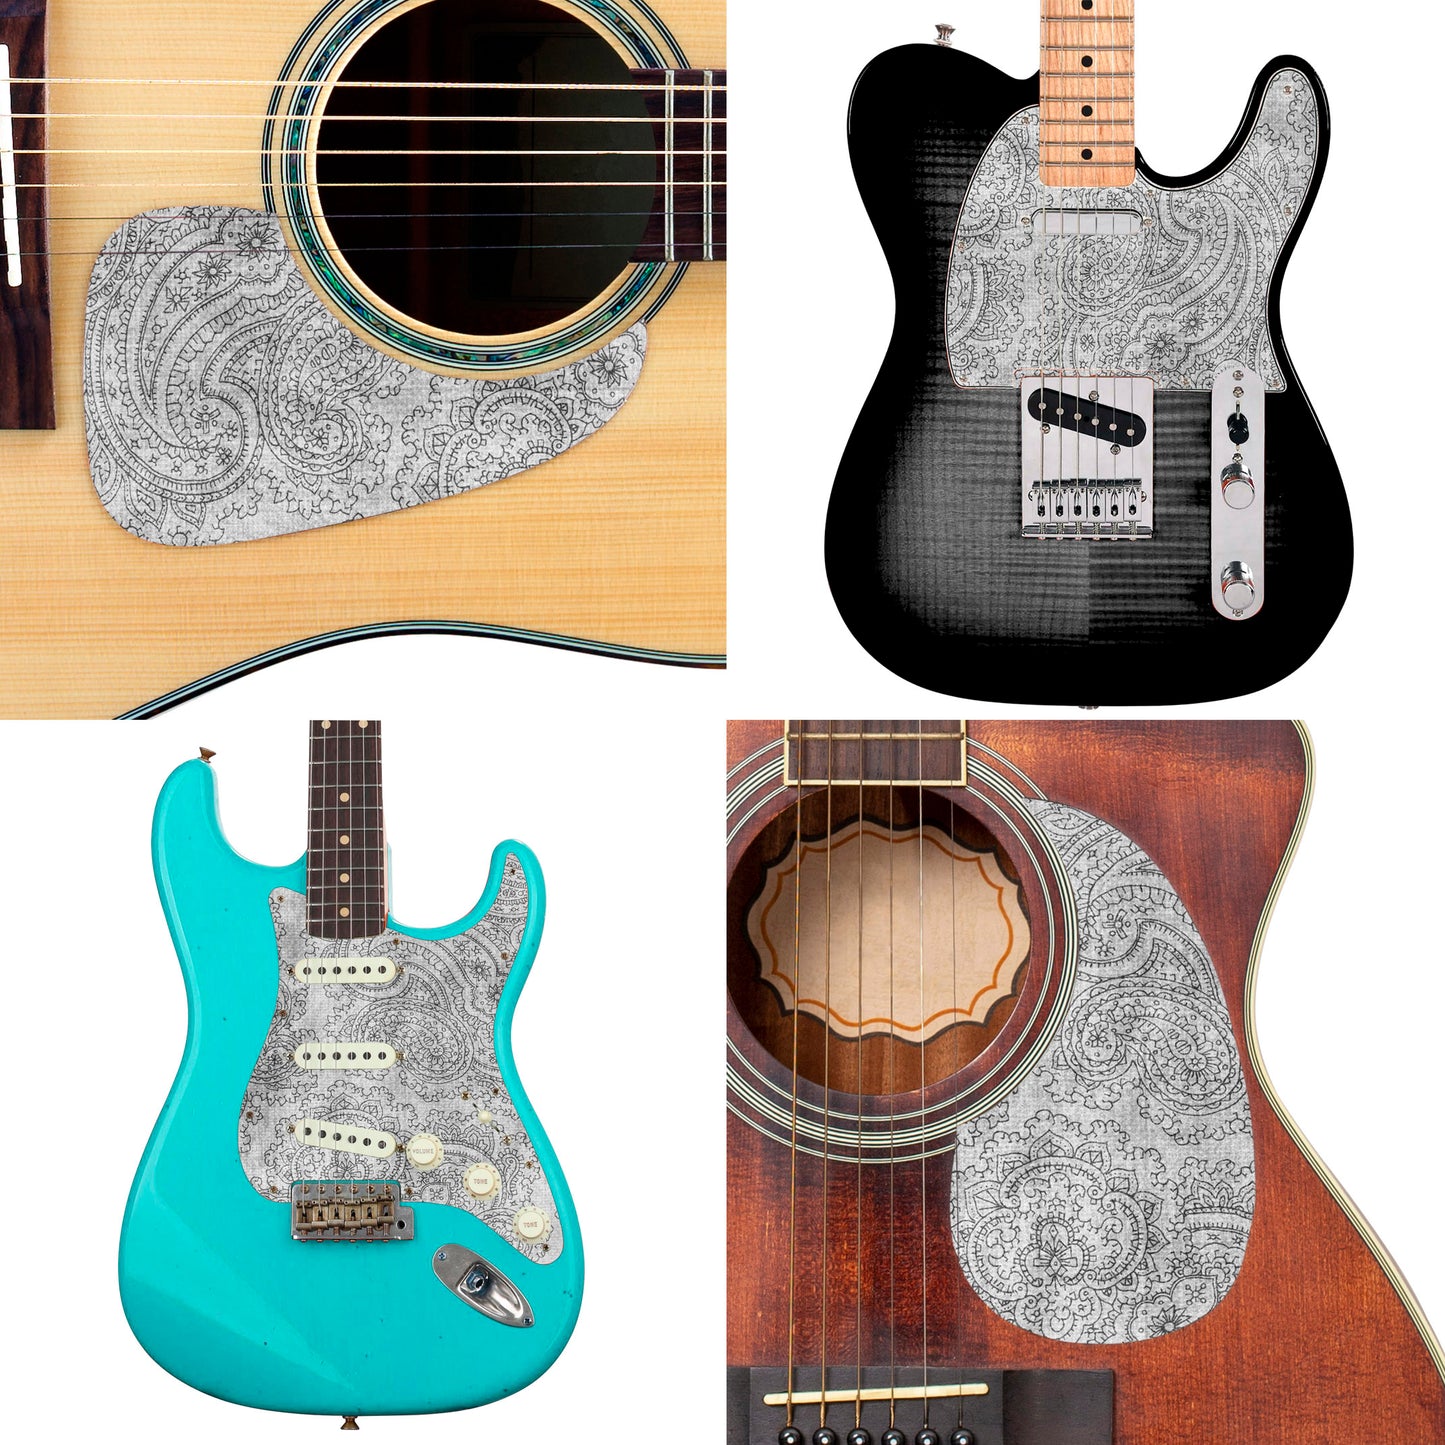 Guitar Custom PickGuard Sticker Skins. Customise your own existing Pickguard, Headstock, Tremolo Cover plate. The Paisleys PK06